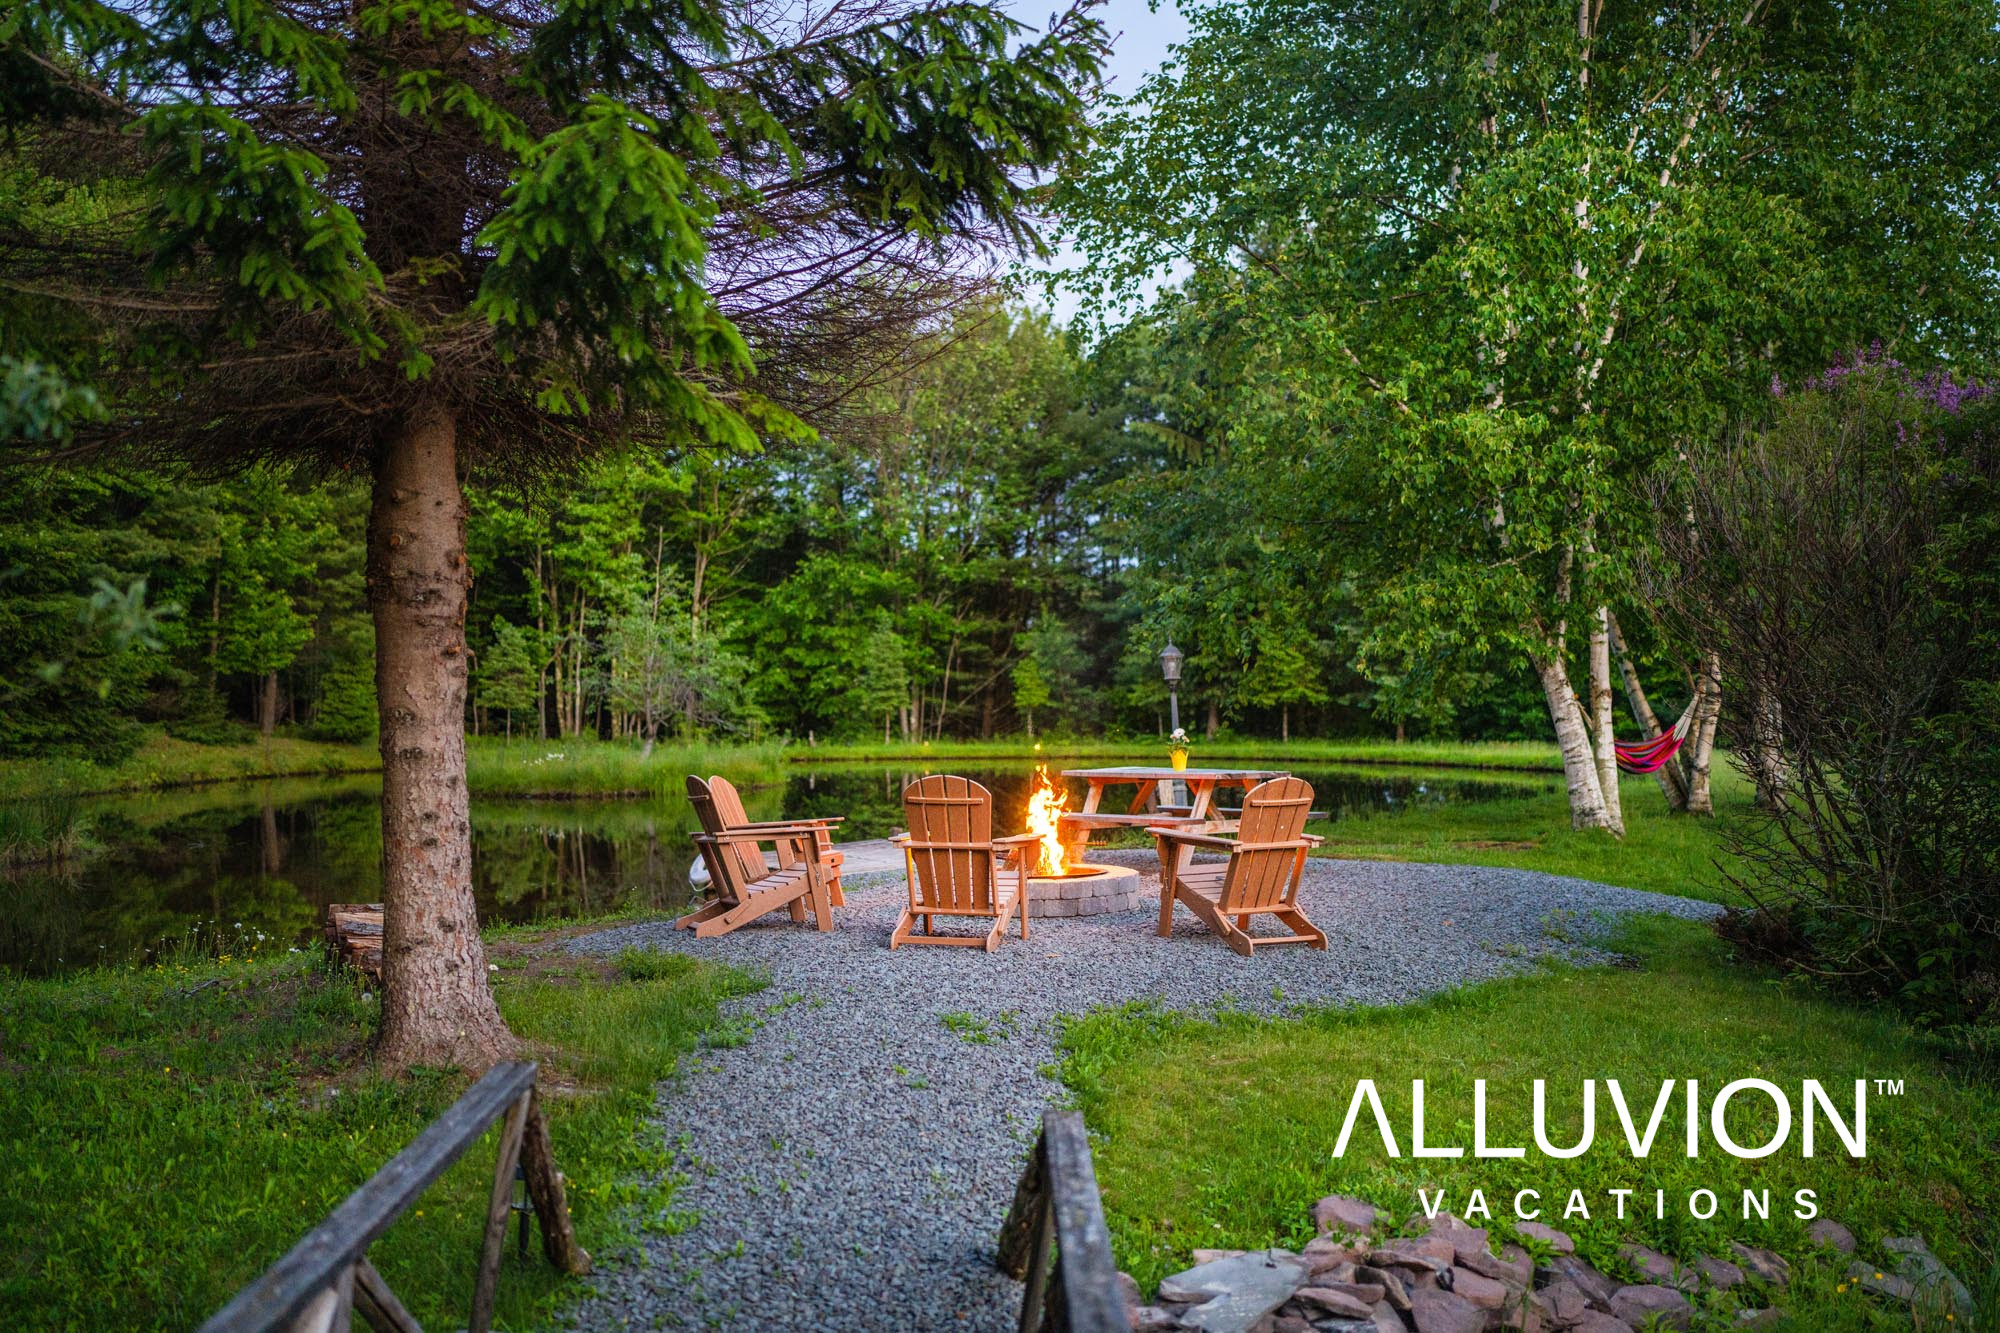 Delhi, NY – Airbnb Farmhouse – Upstate, NY – Alluvion Vacations – The Best Vacation Rentals in the Hudson Valley and Catskills